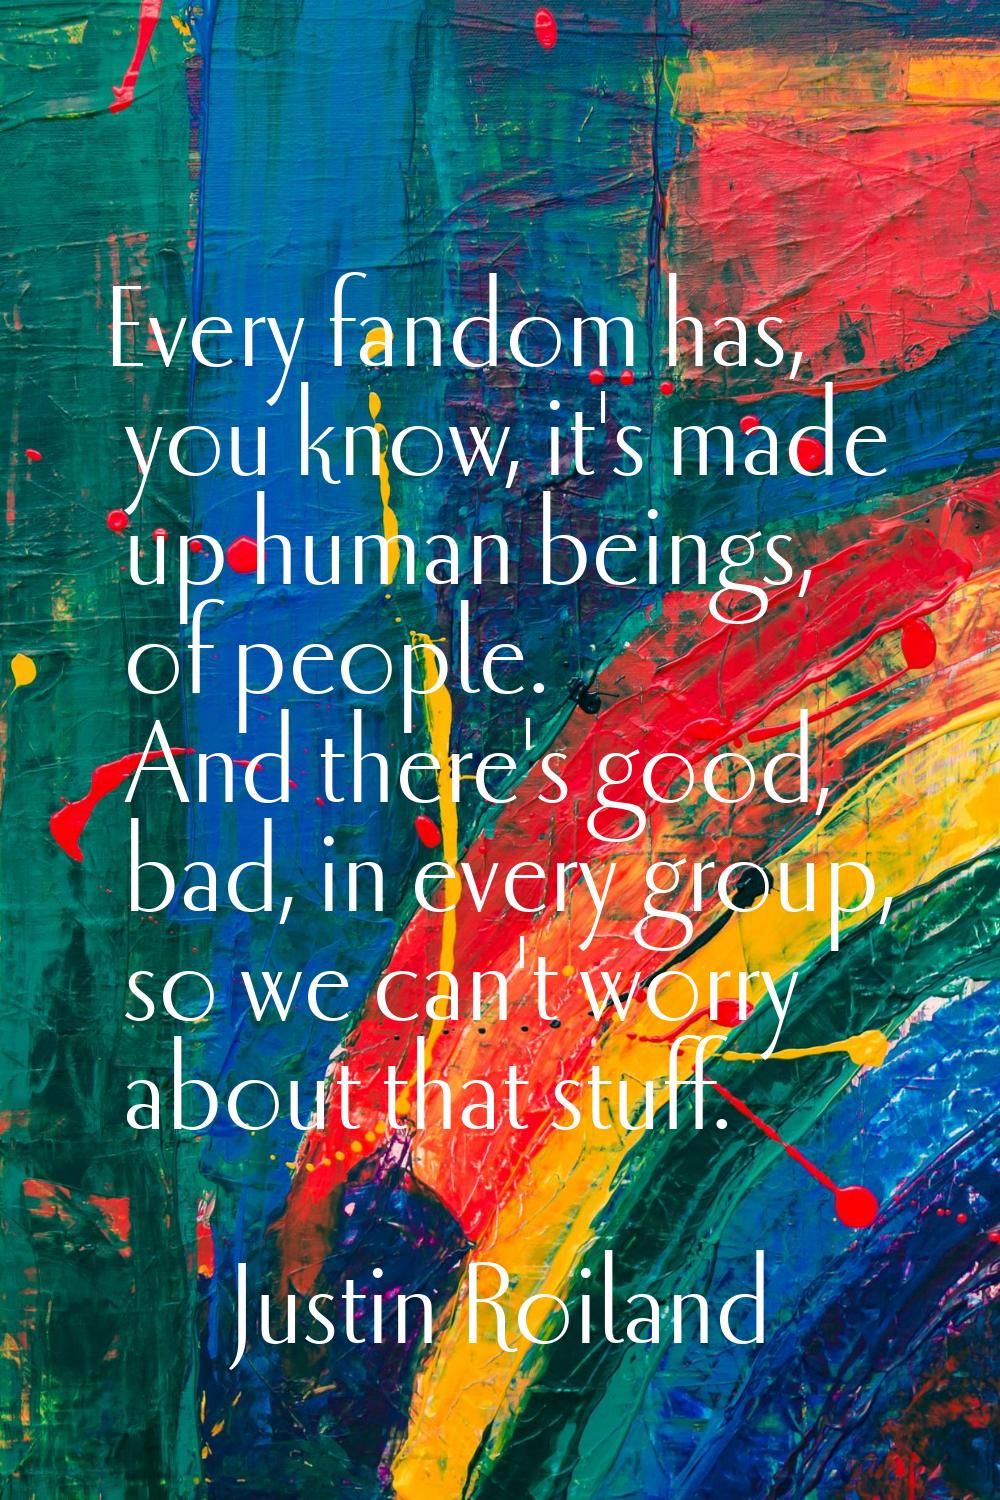 Every fandom has, you know, it's made up human beings, of people. And there's good, bad, in every g